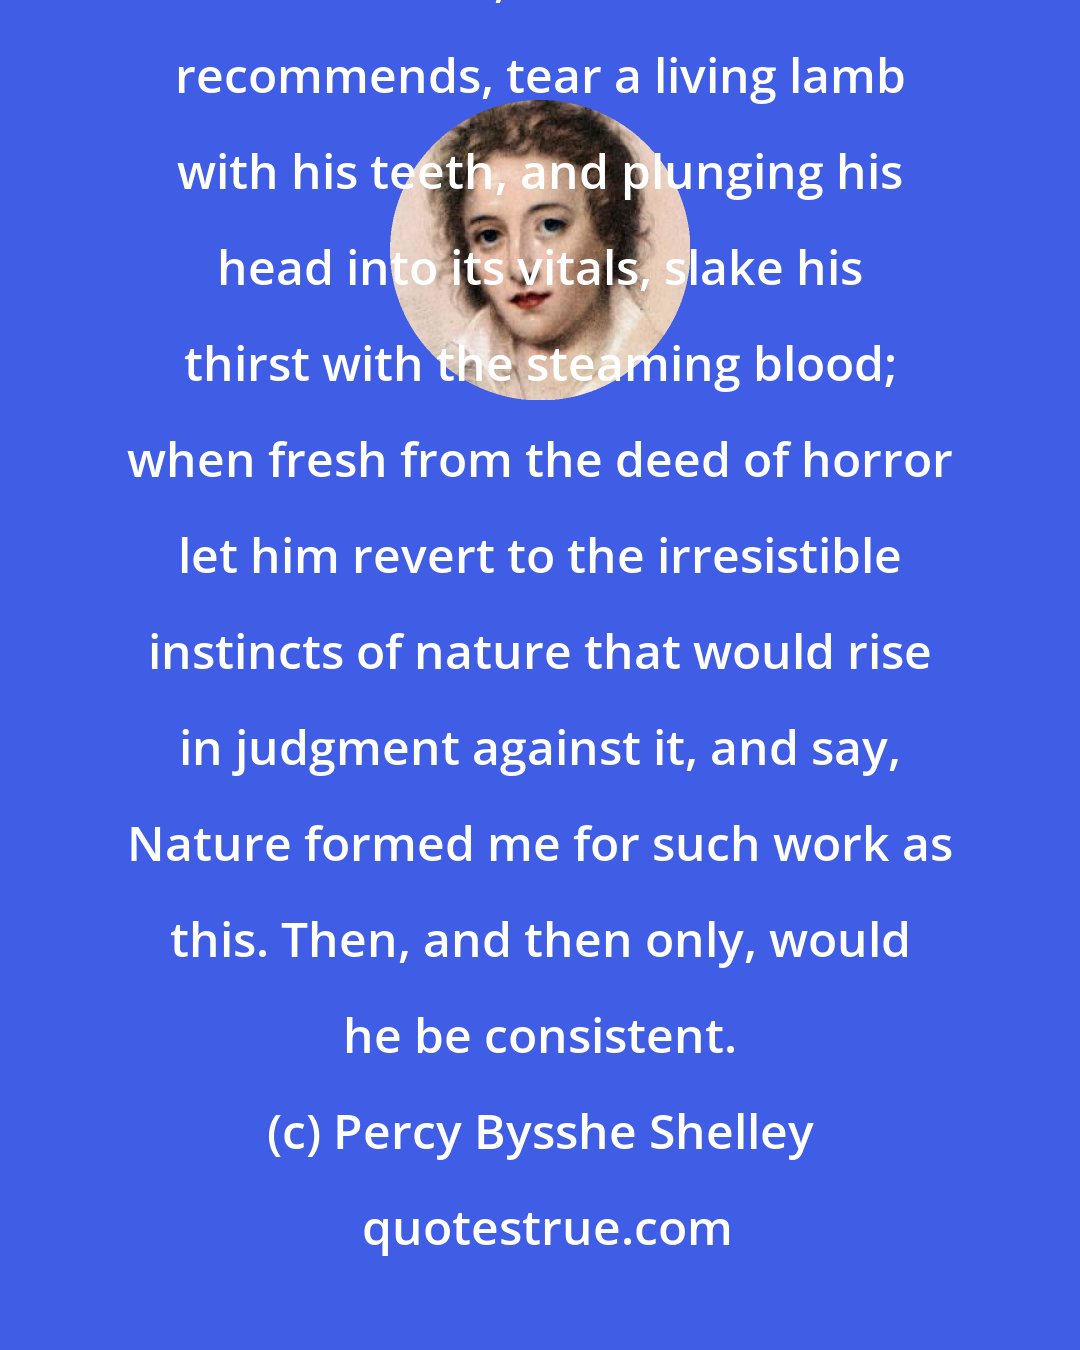 Percy Bysshe Shelley: Let the advocate of animal food, force himself to a decisive experiment on its fitness, and as Plutarch recommends, tear a living lamb with his teeth, and plunging his head into its vitals, slake his thirst with the steaming blood; when fresh from the deed of horror let him revert to the irresistible instincts of nature that would rise in judgment against it, and say, Nature formed me for such work as this. Then, and then only, would he be consistent.